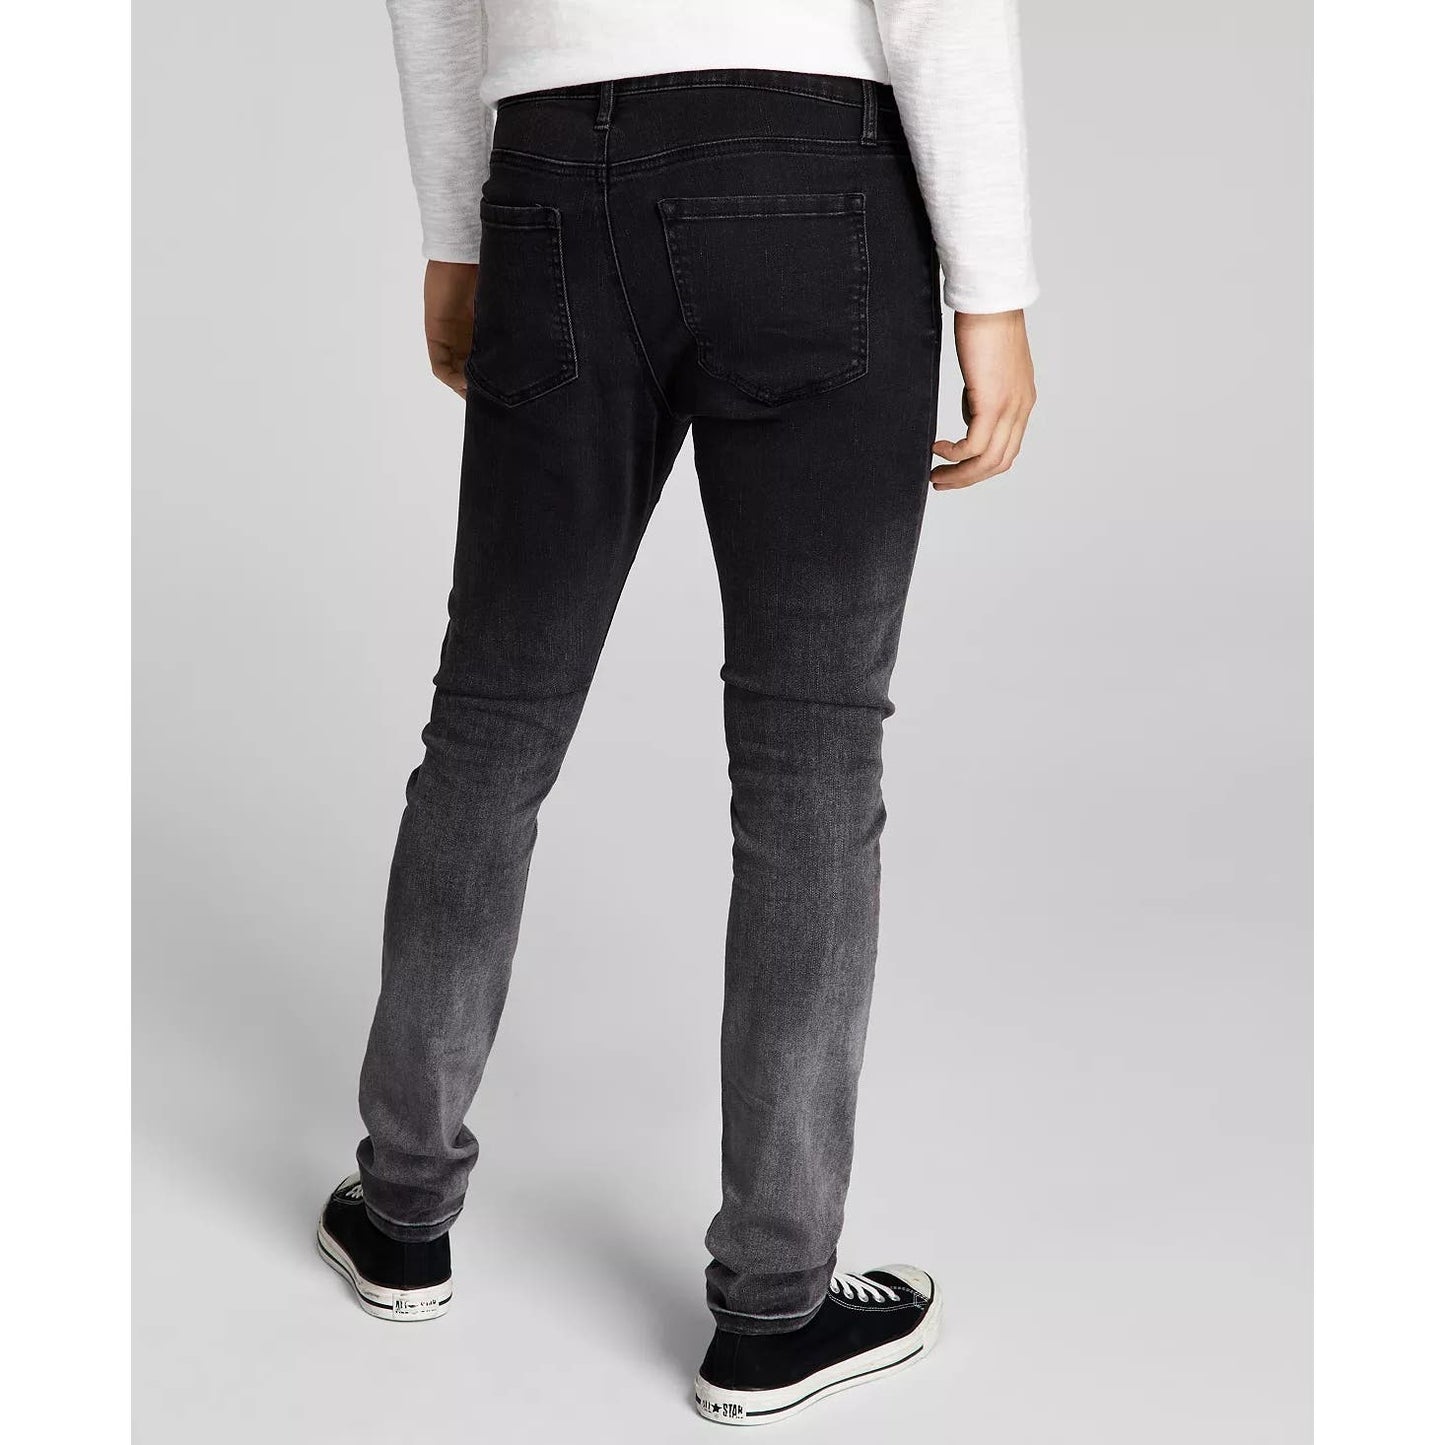 AND NOW THIS Men's Dennett Skinny-Fit Stretch Ombre Fade Denim Jeans